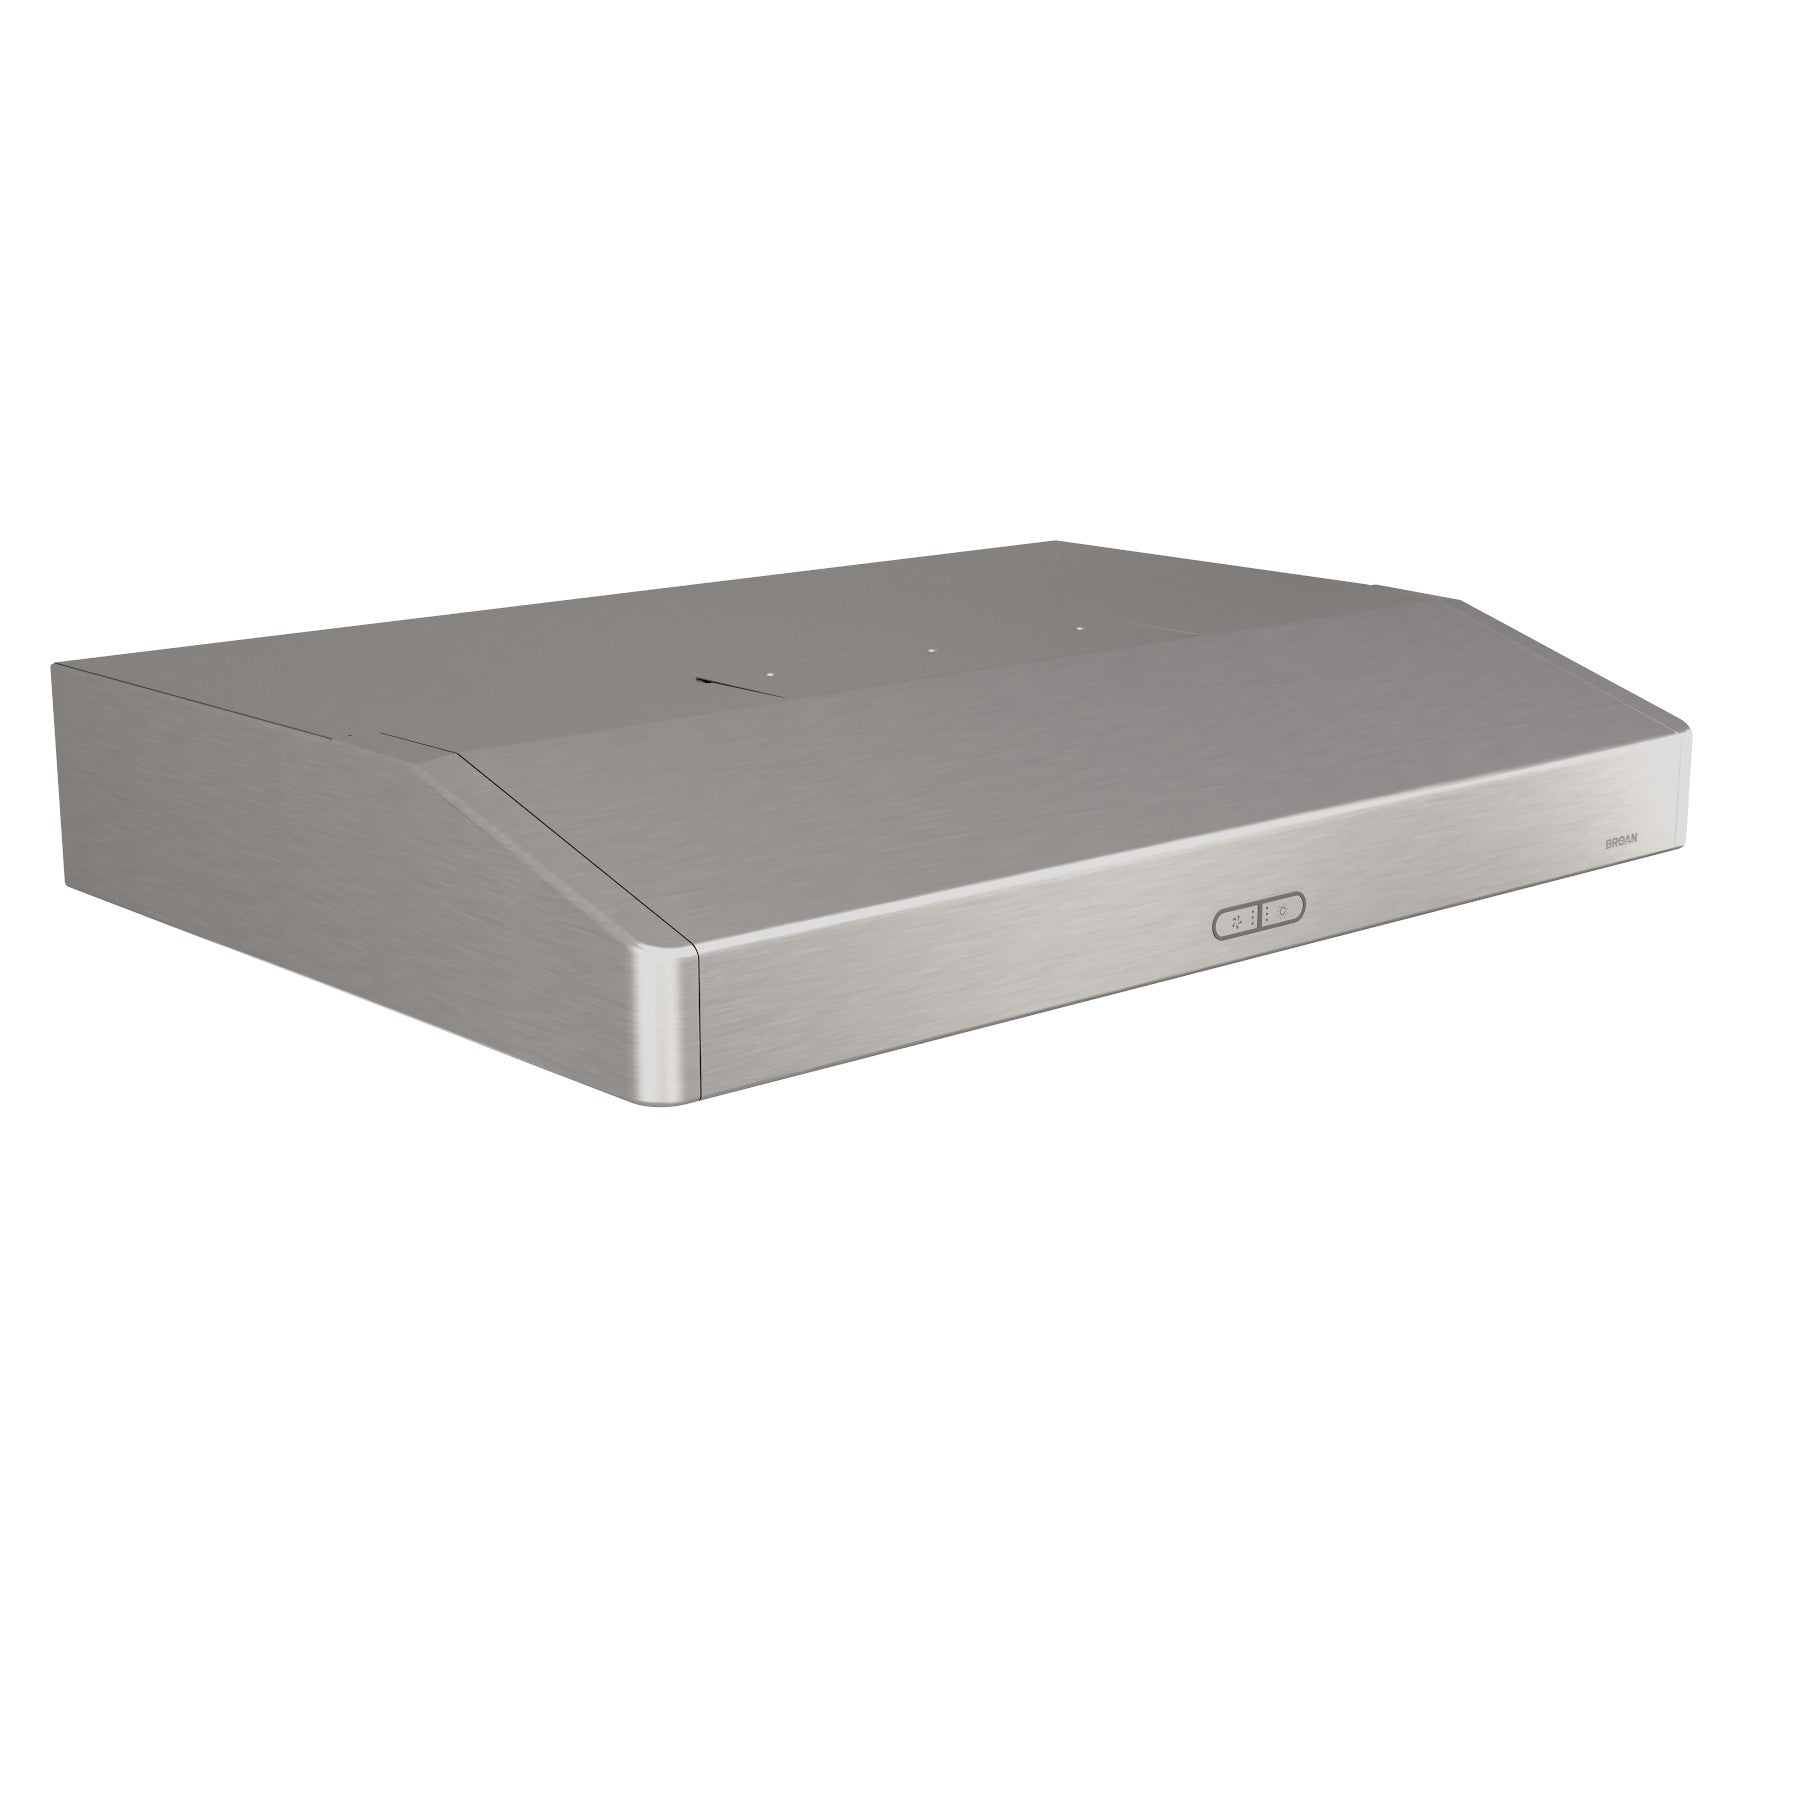 Broan - 24 Inch 375 CFM Under Cabinet Range Vent in Stainless - BNDD124SS